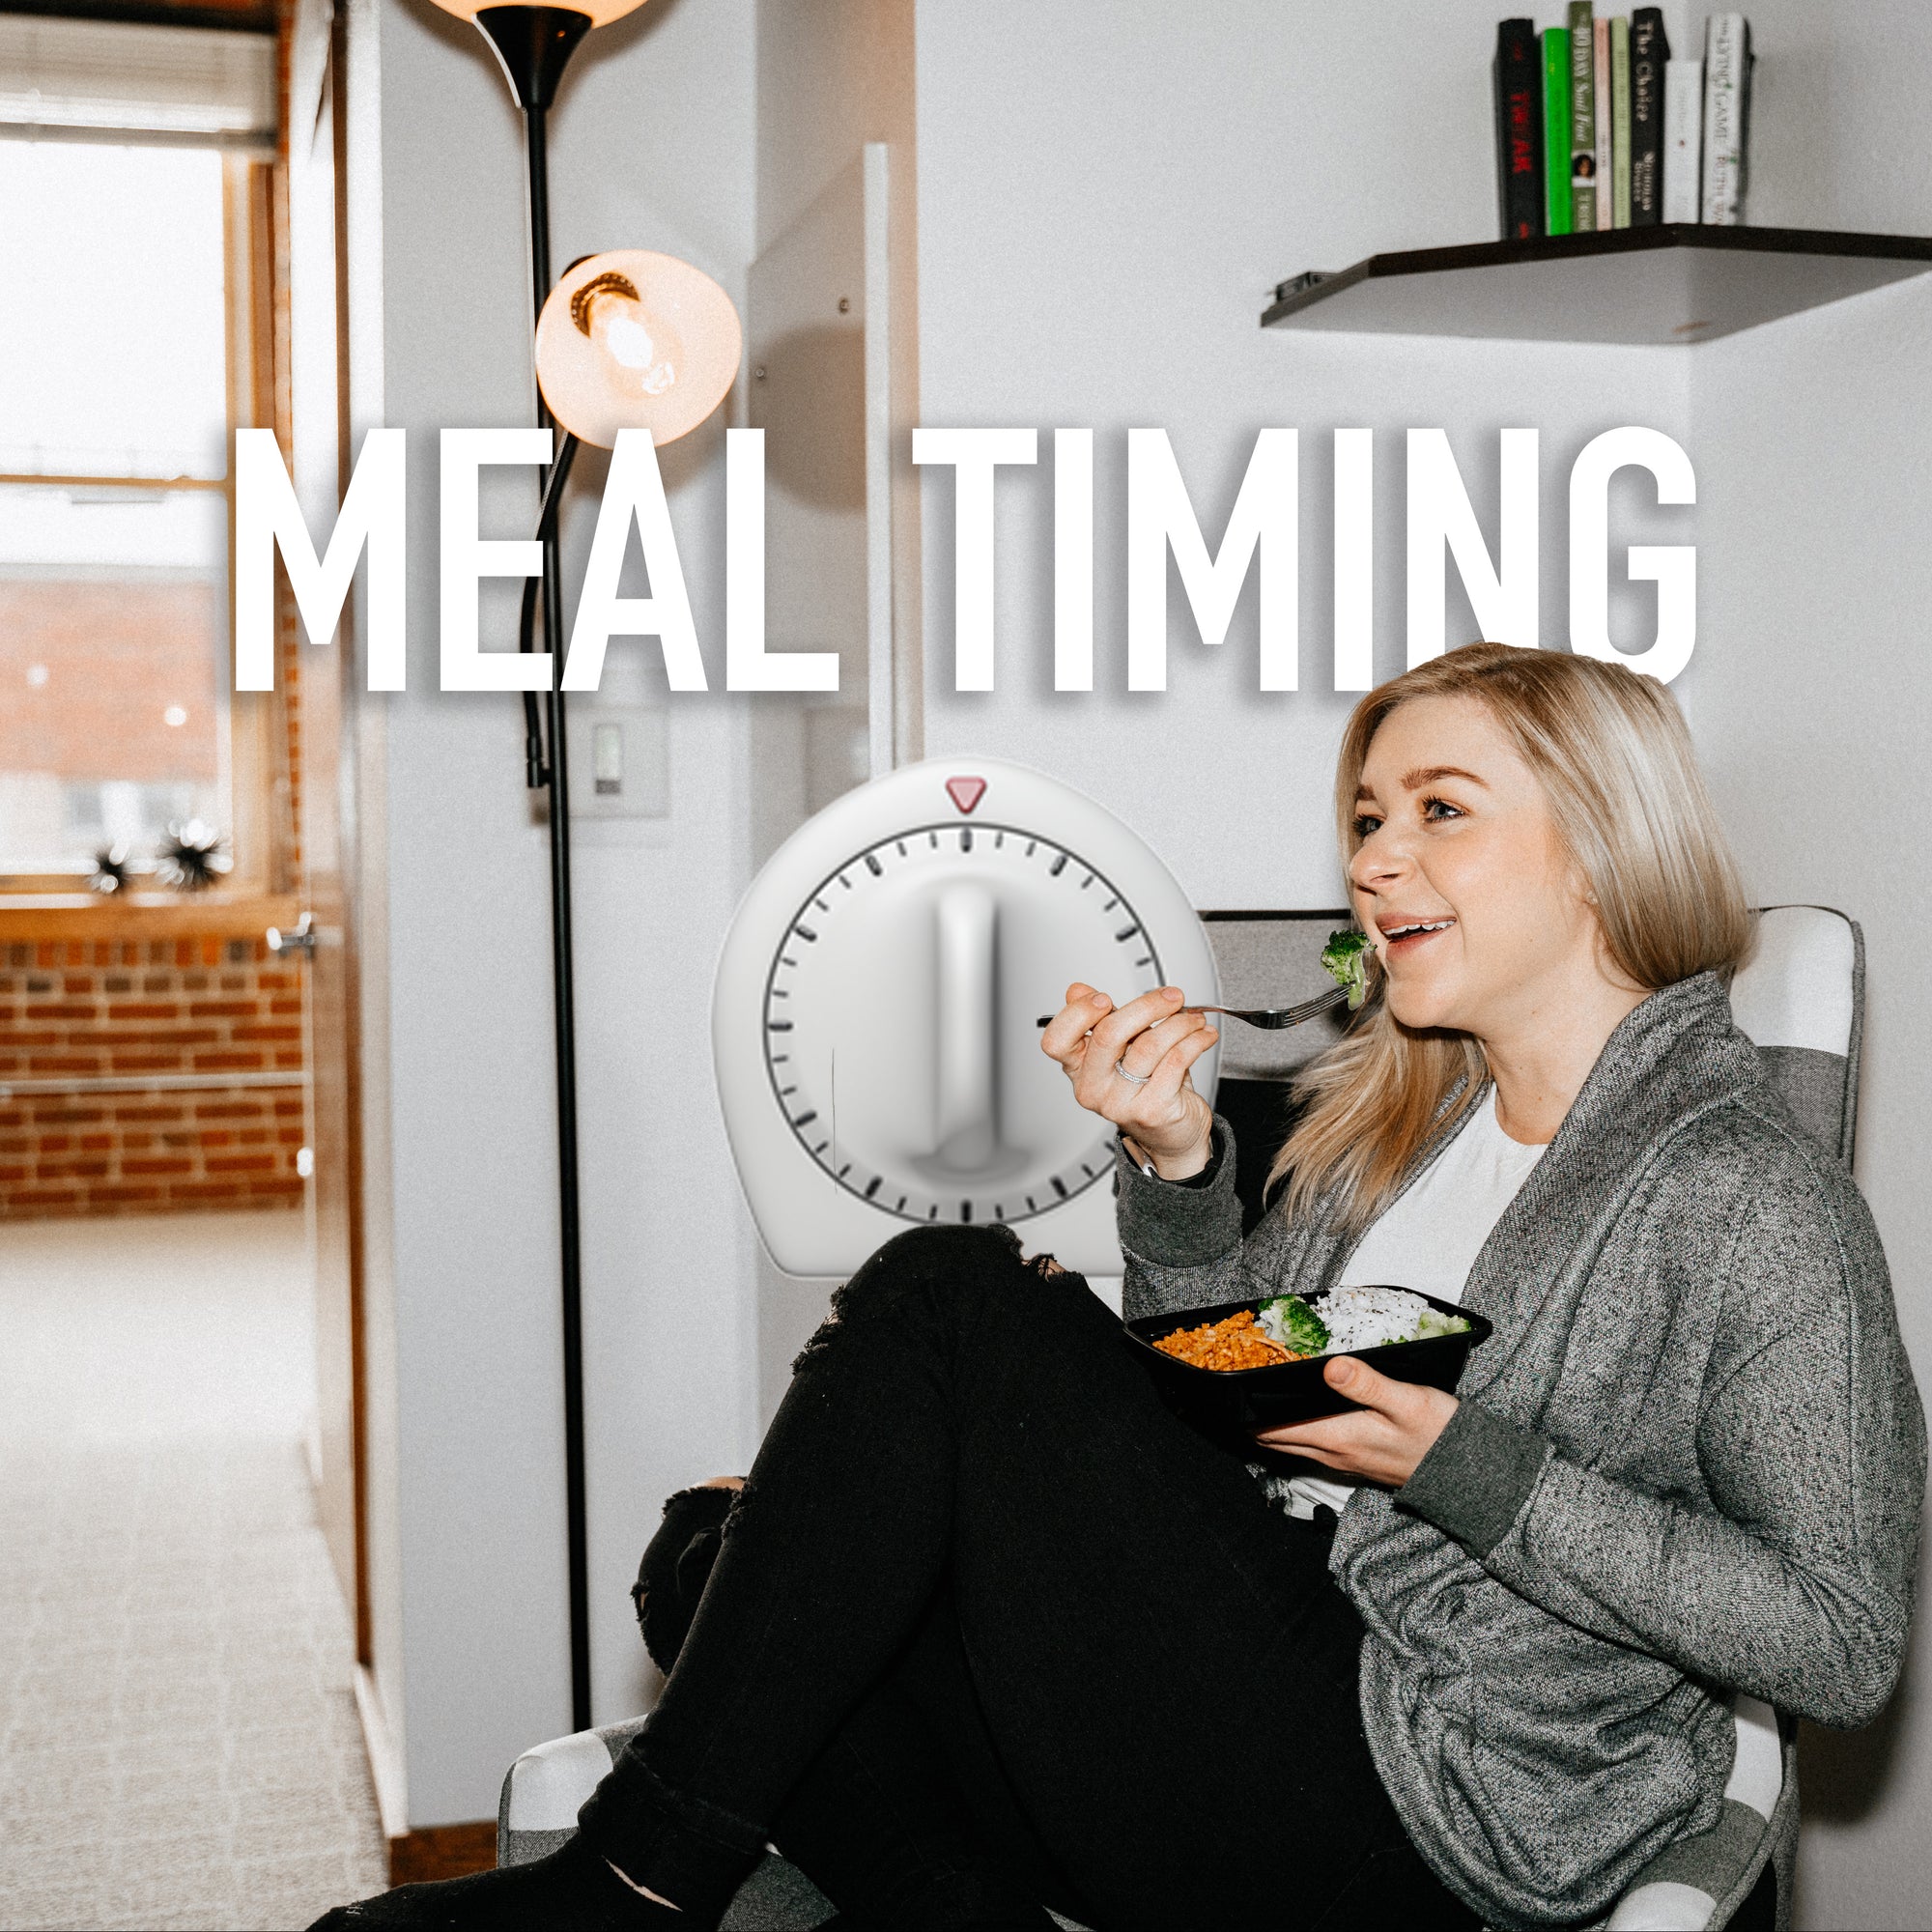 How Important is Meal Timing? 🧐